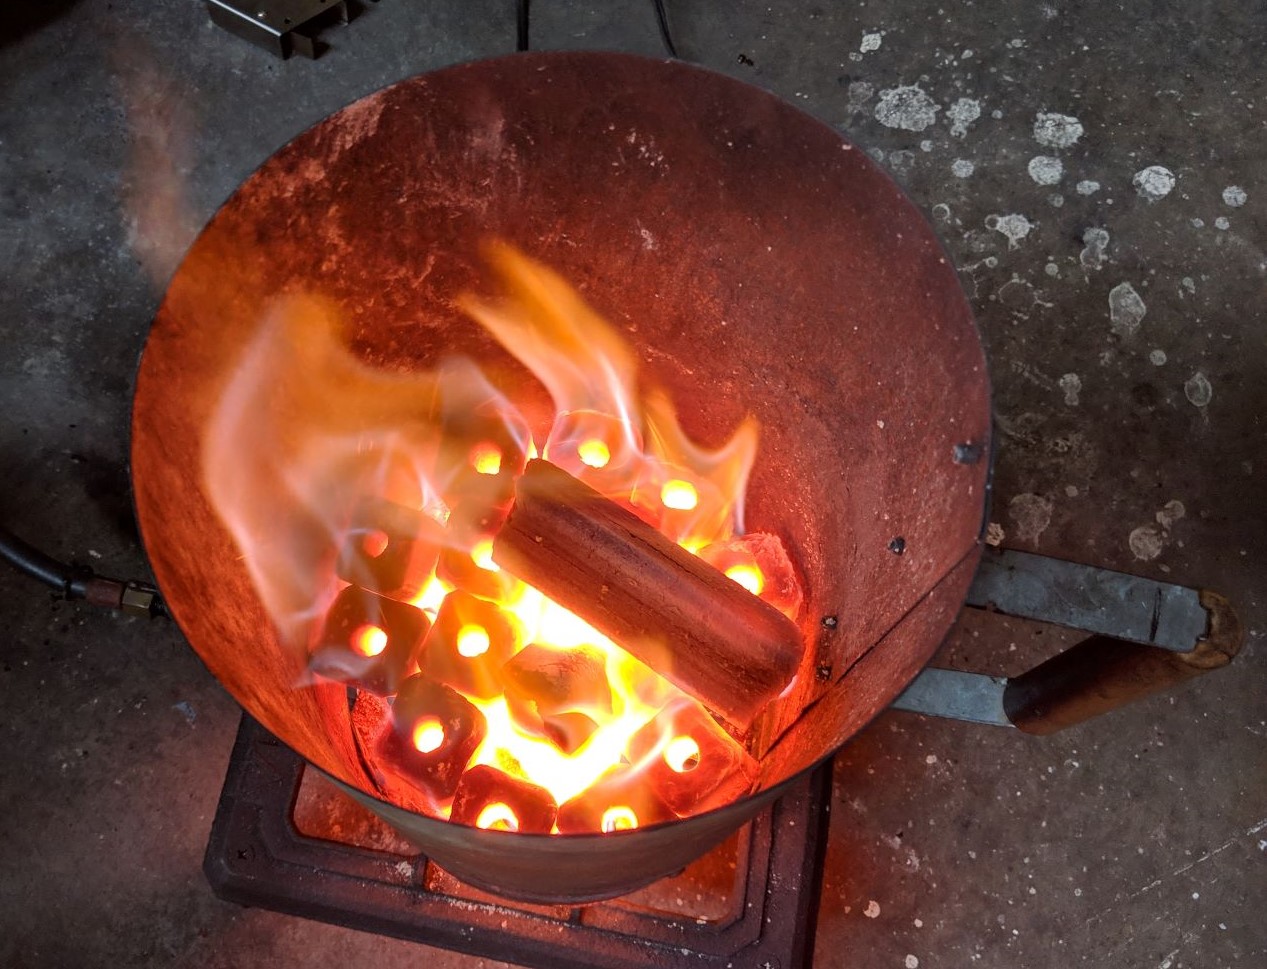 image show charcoal briquettes being lit in a chimney starter